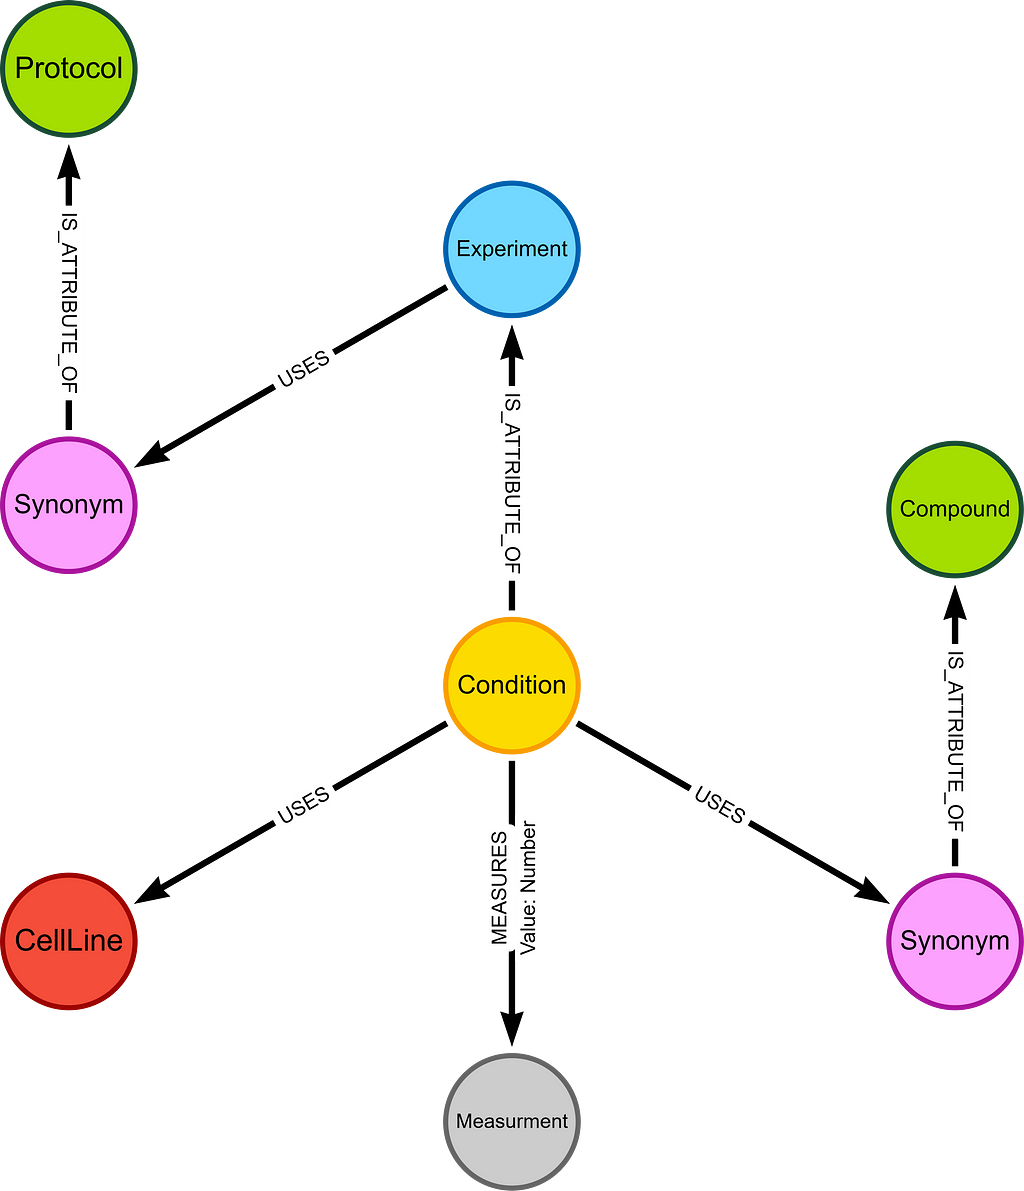 Overview of the graph design